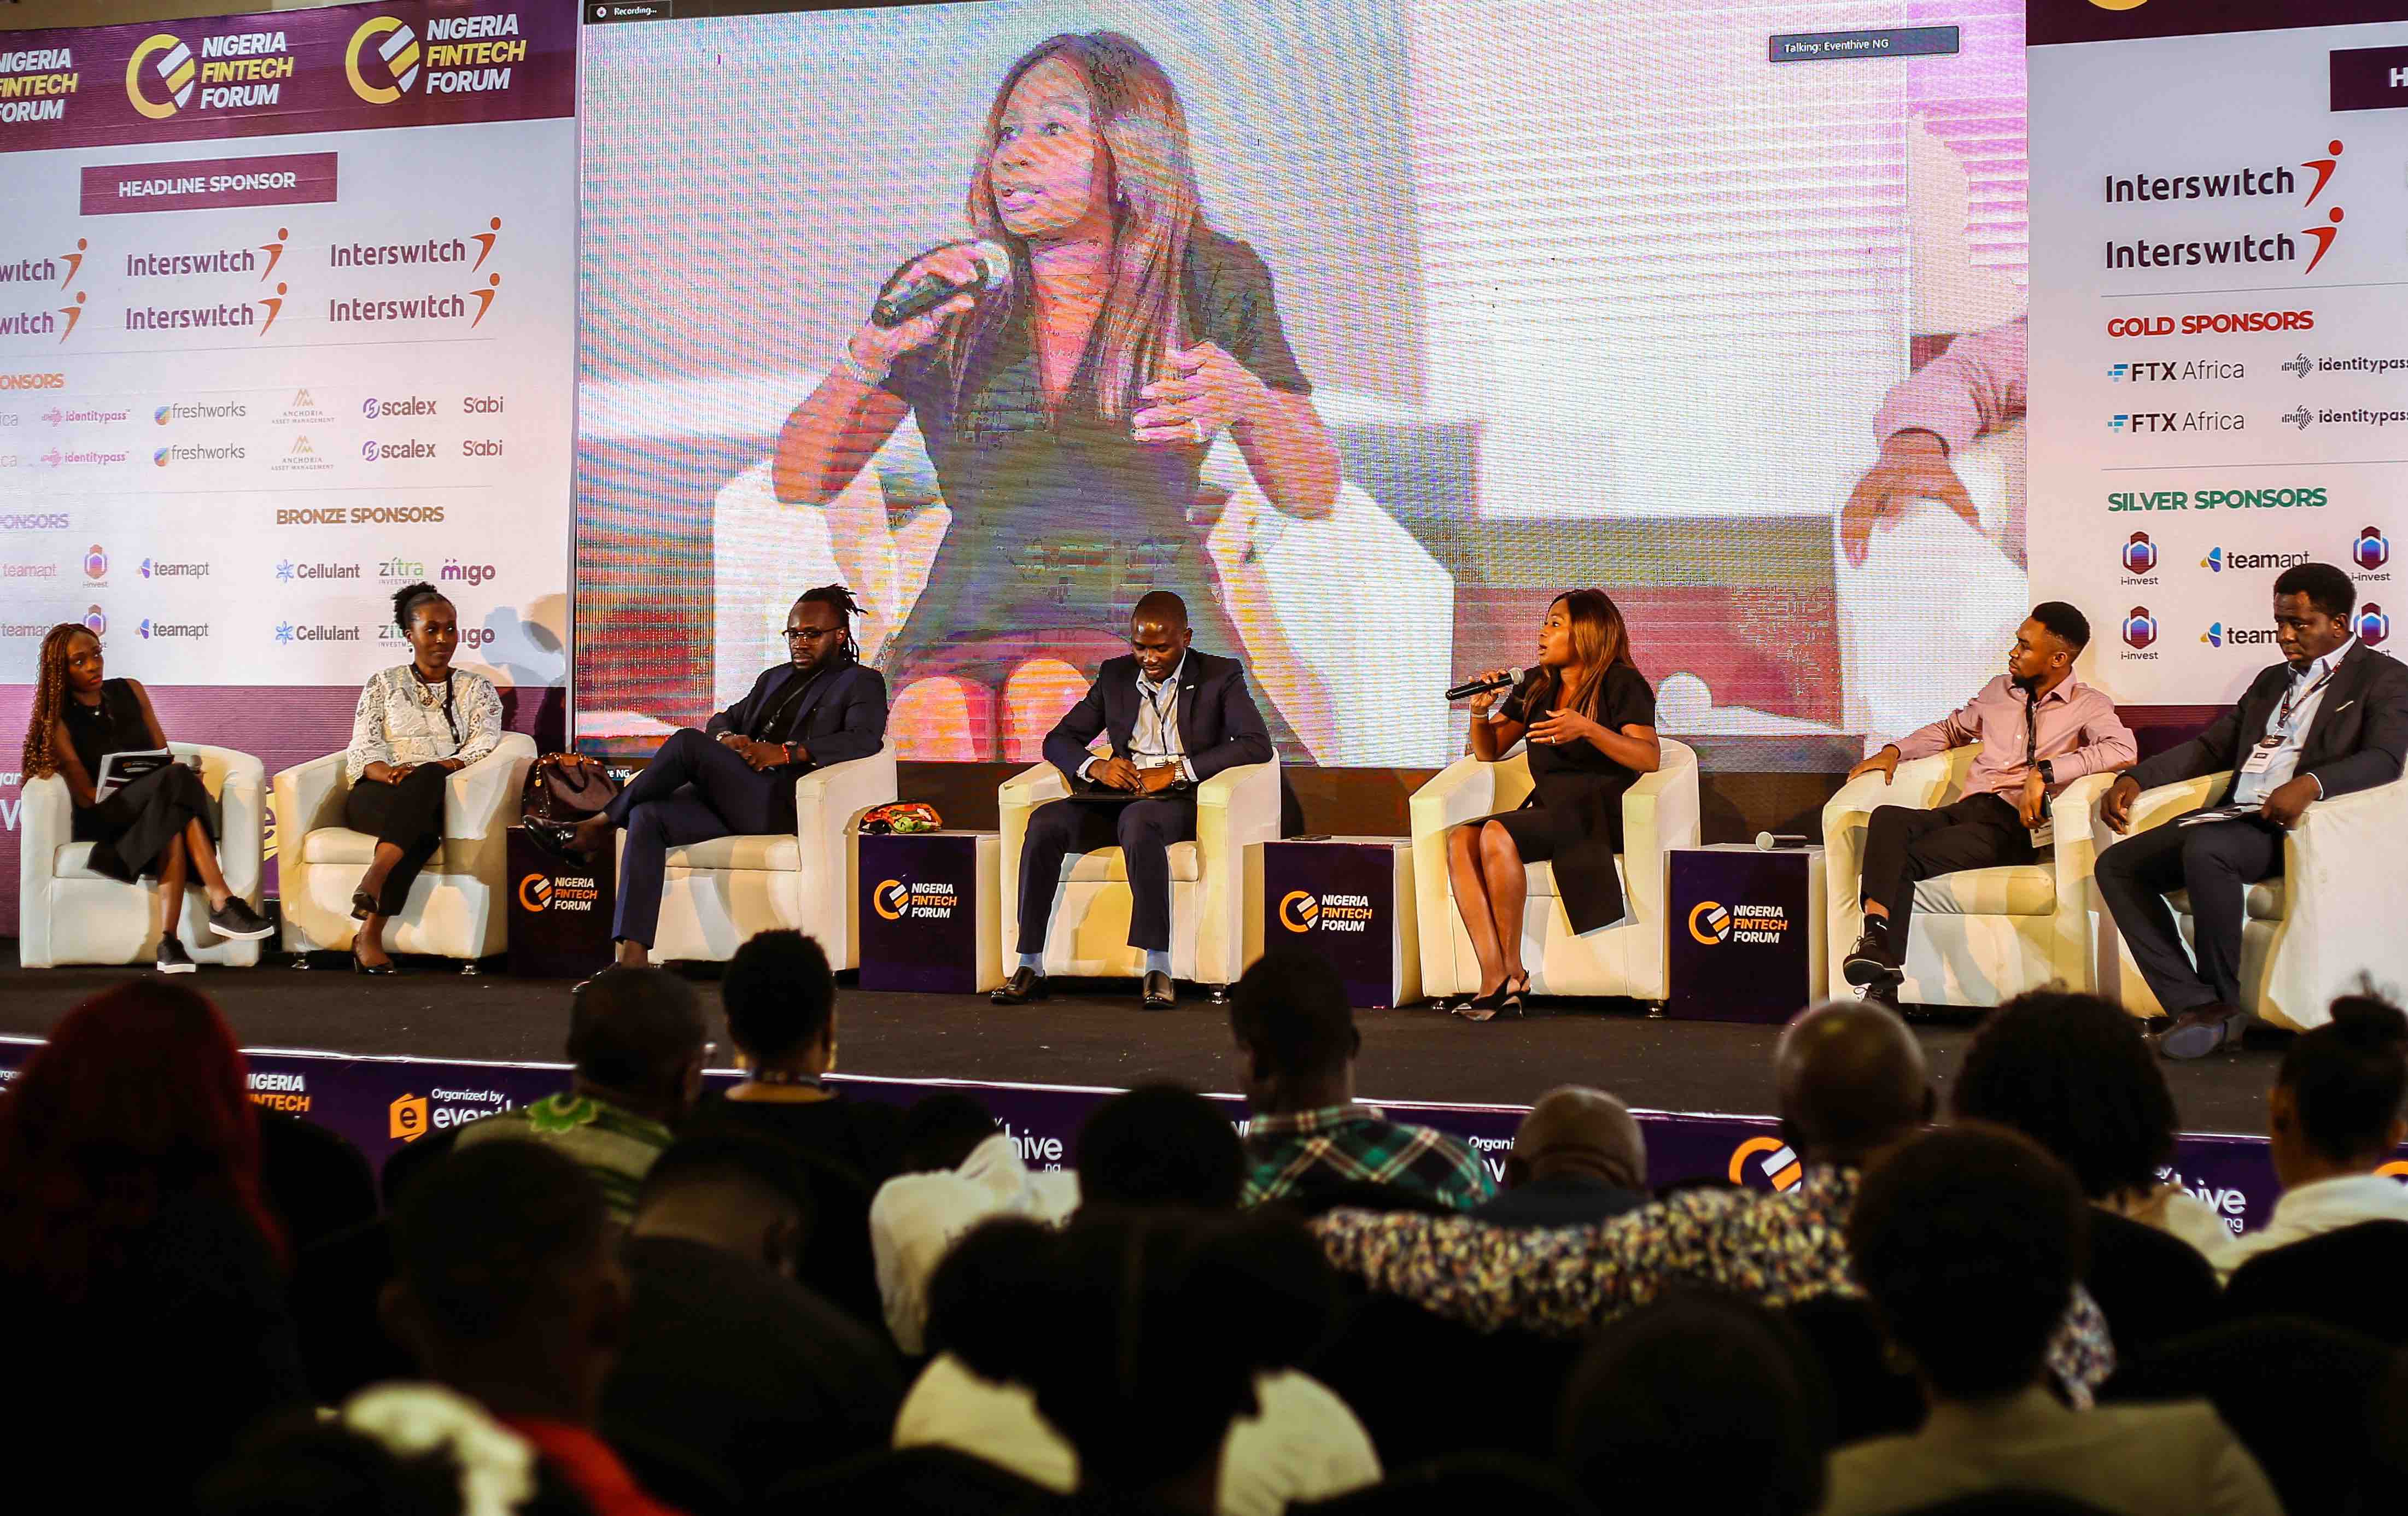 Tobi Olusoga, Chief Product Officer, i-invest discussing with other experts at the Nigeria Fintech Forum in Lagos